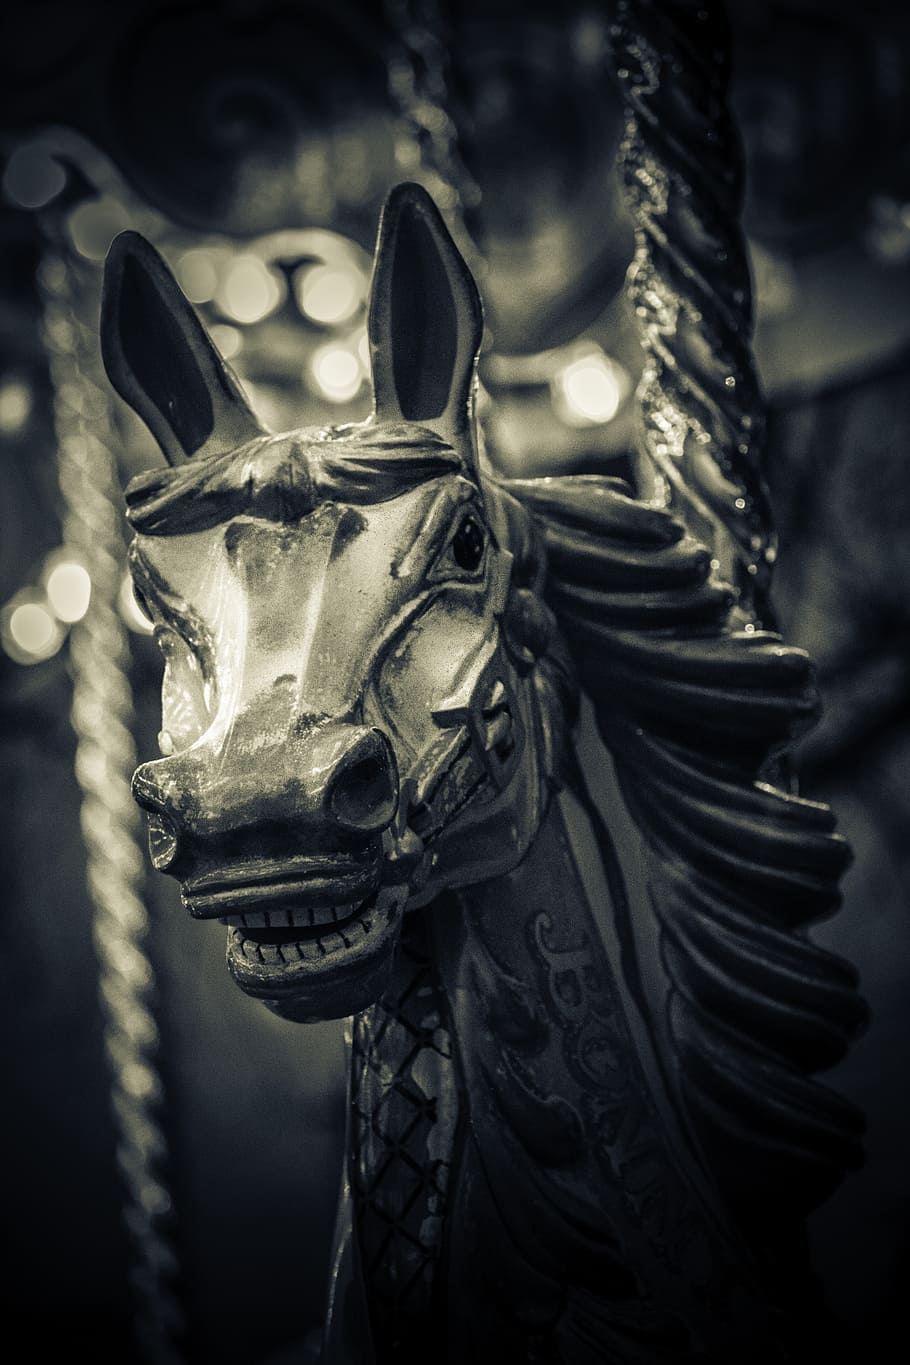 carousel horse, creepy, black and white, roundabout, scary, spooky, amusement, carnival, carousel, dark